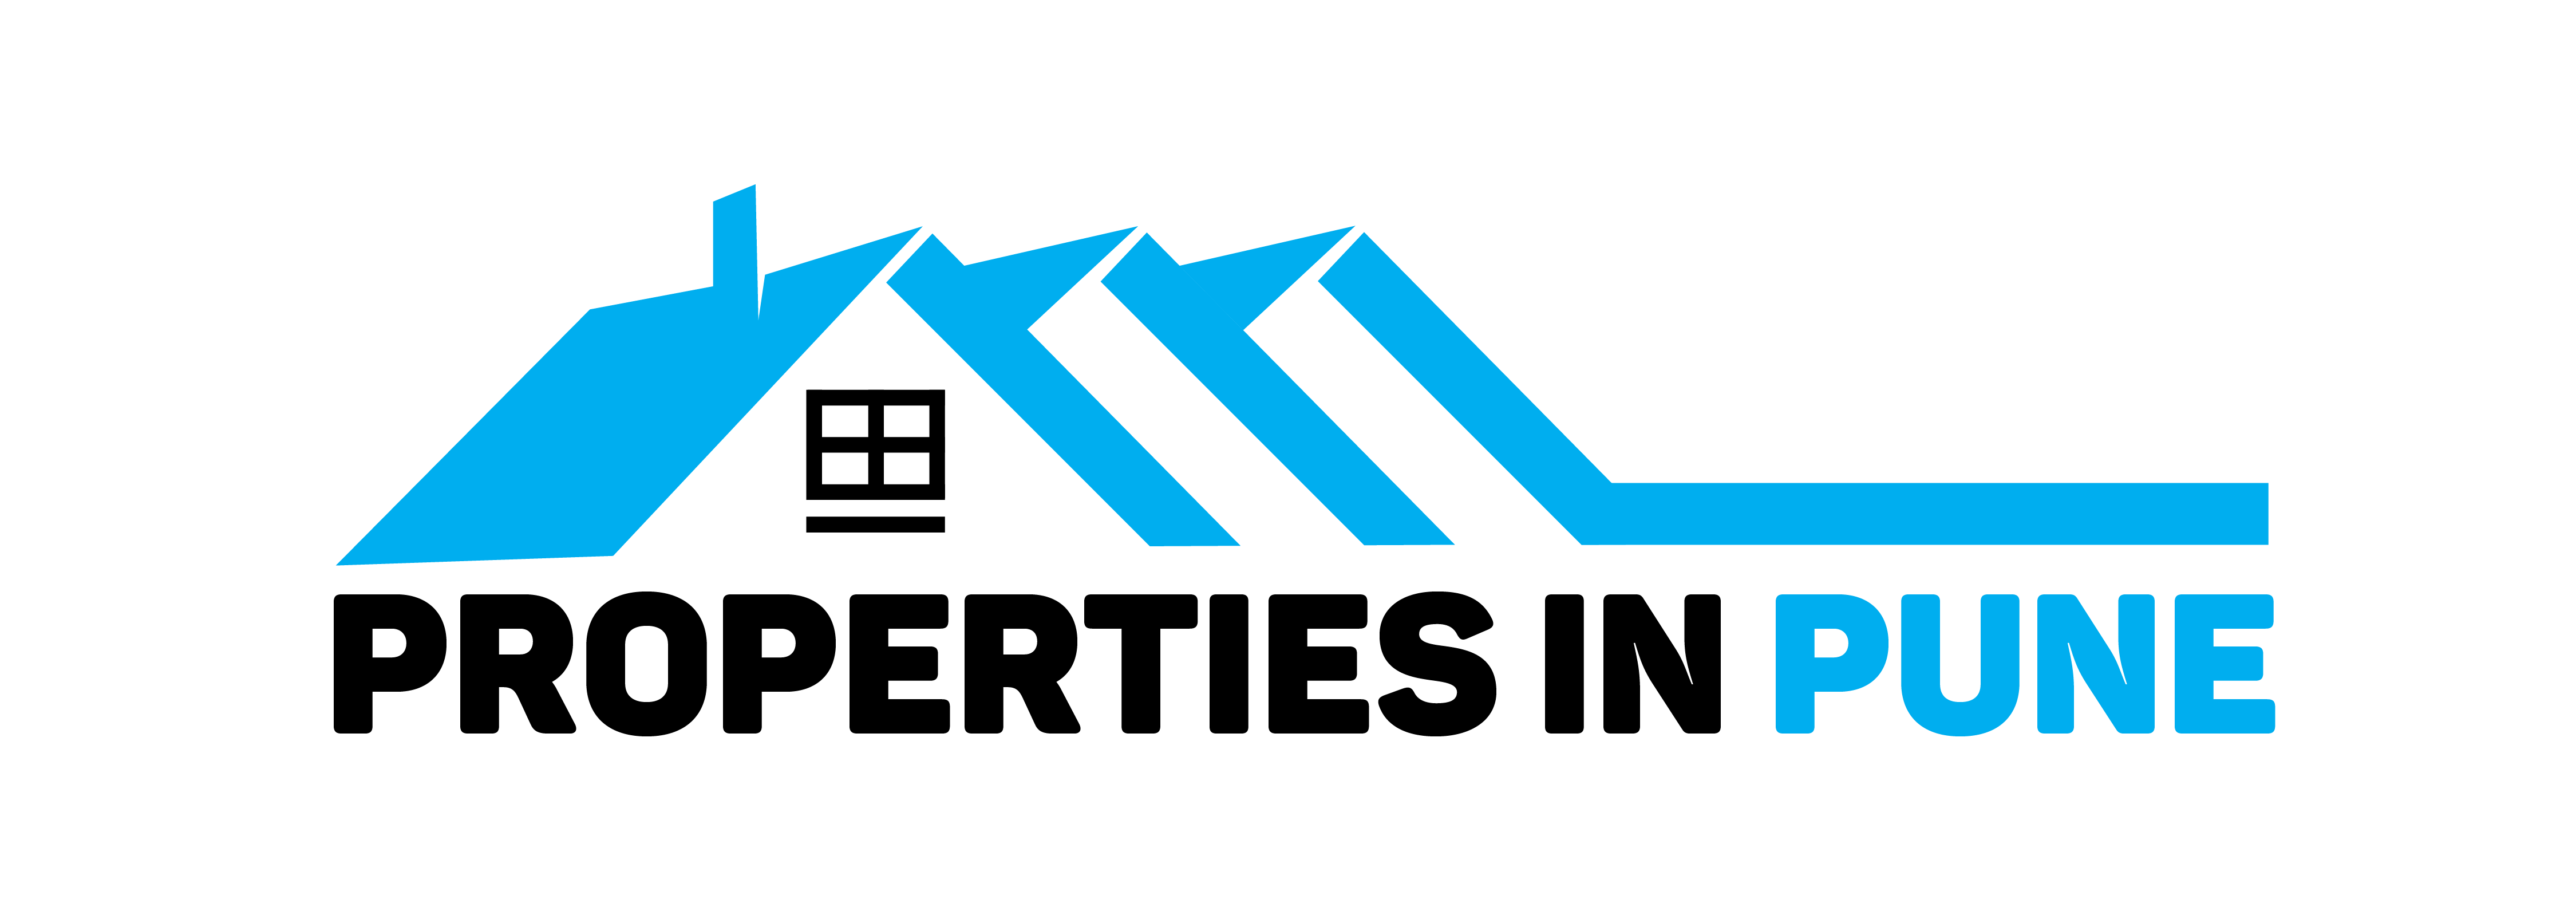 Real Estate Properties In Pune| Buy/Sell/ Rent Property in Pune